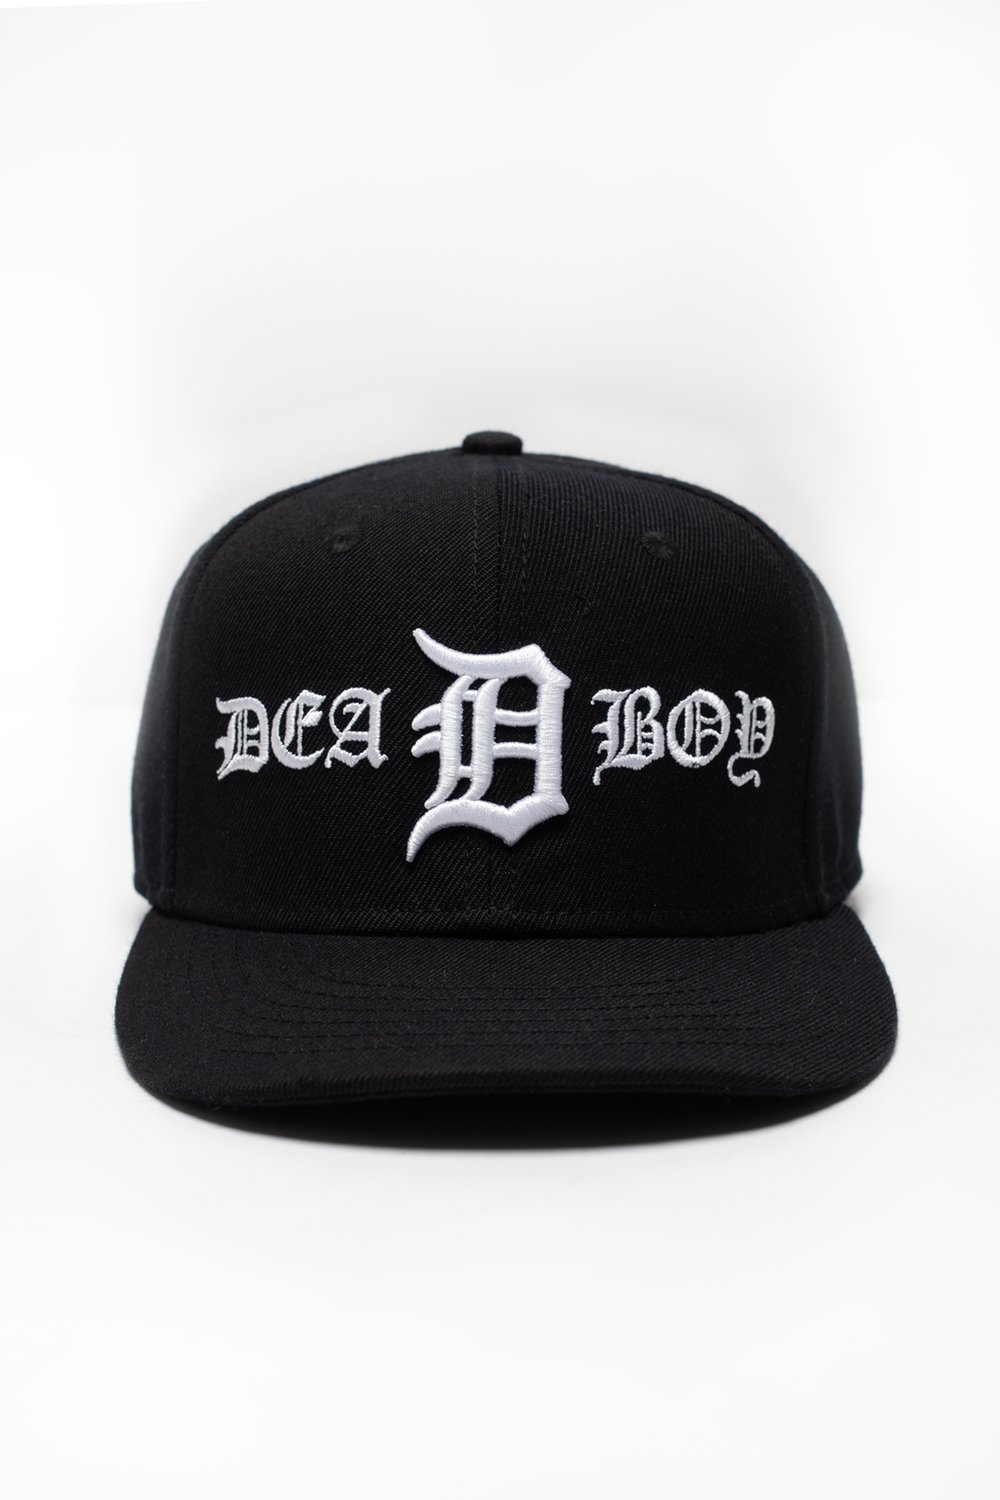 Image of DeadEra "DetroitDeadBoy" Fitted Hat 